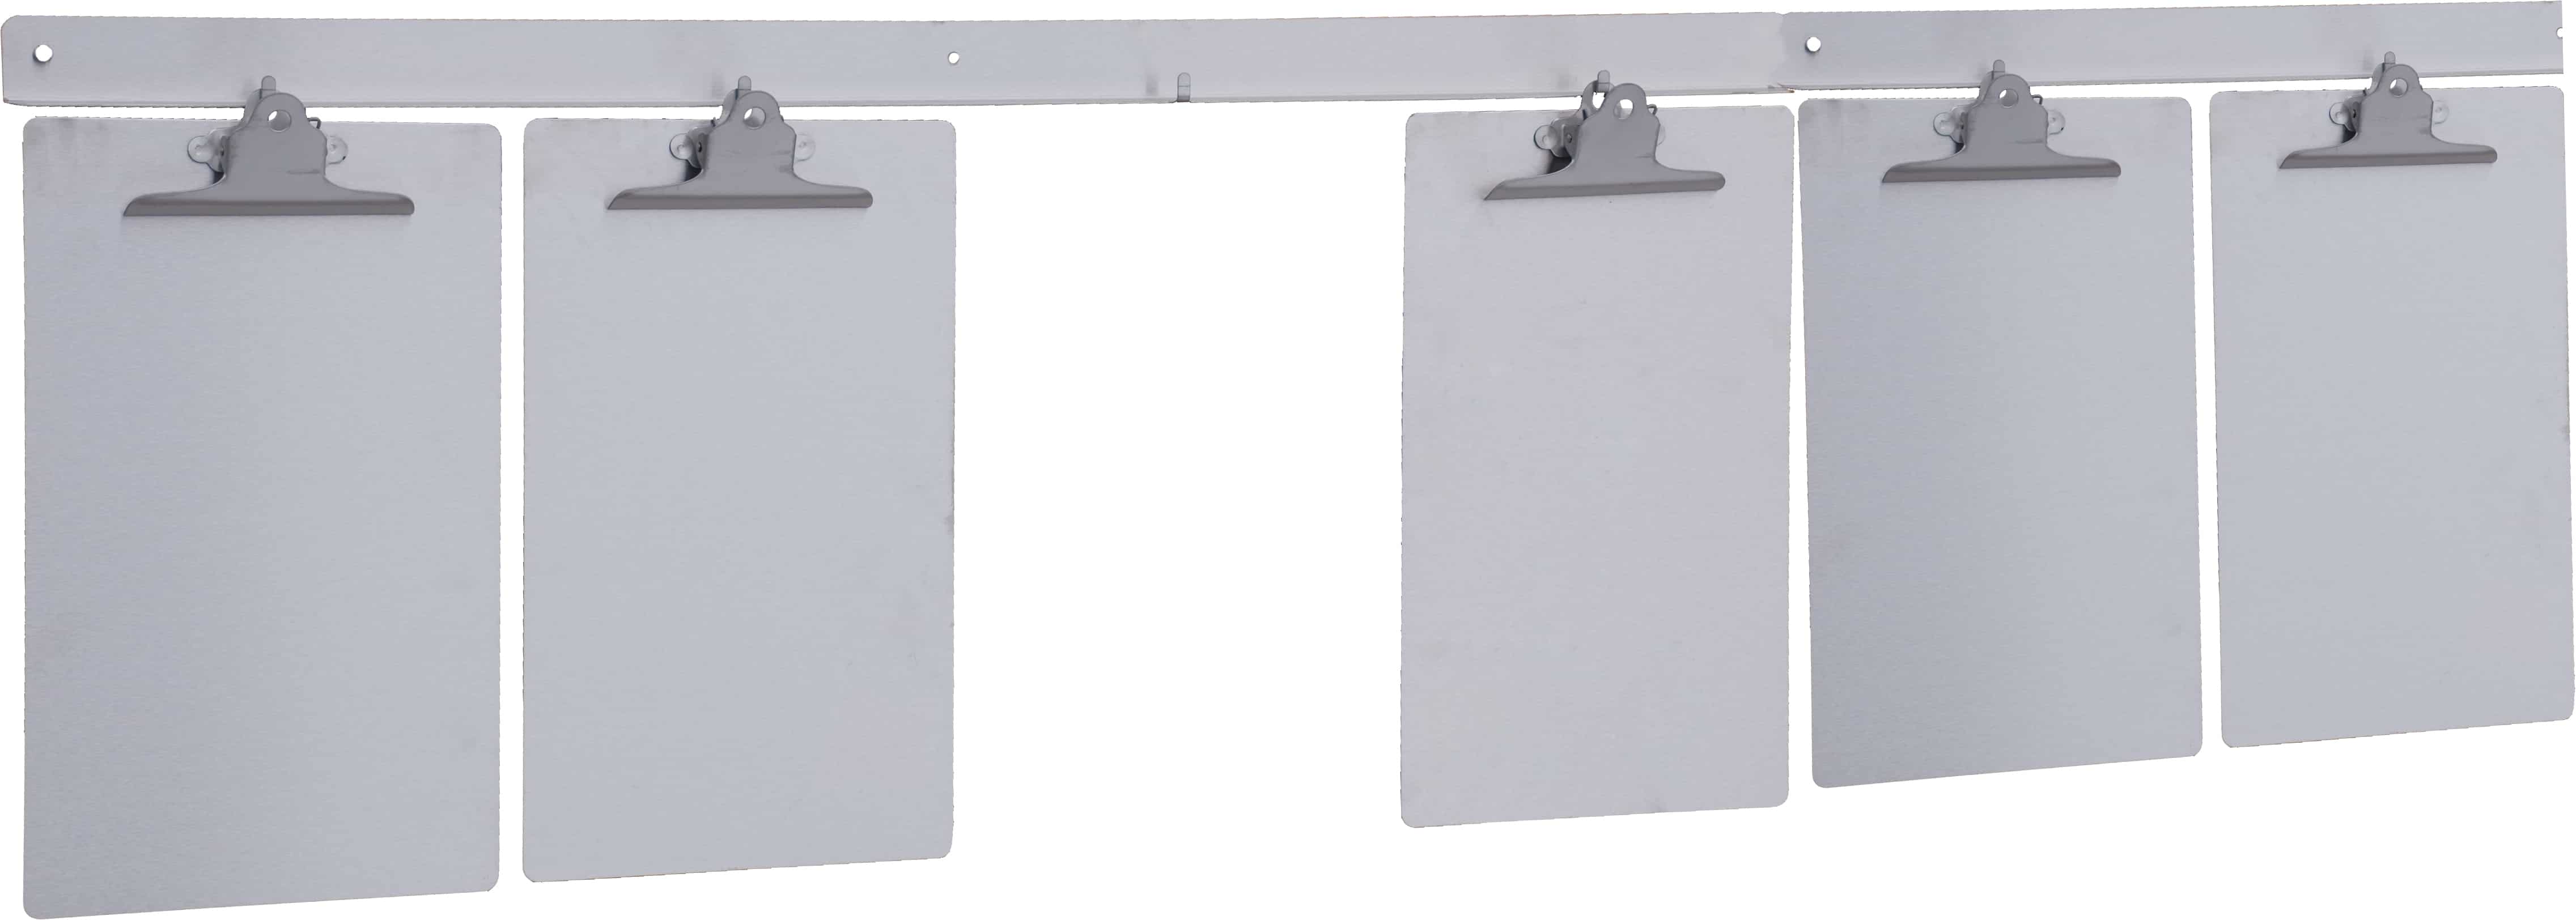 Stainless steel hanging racks for clipboards